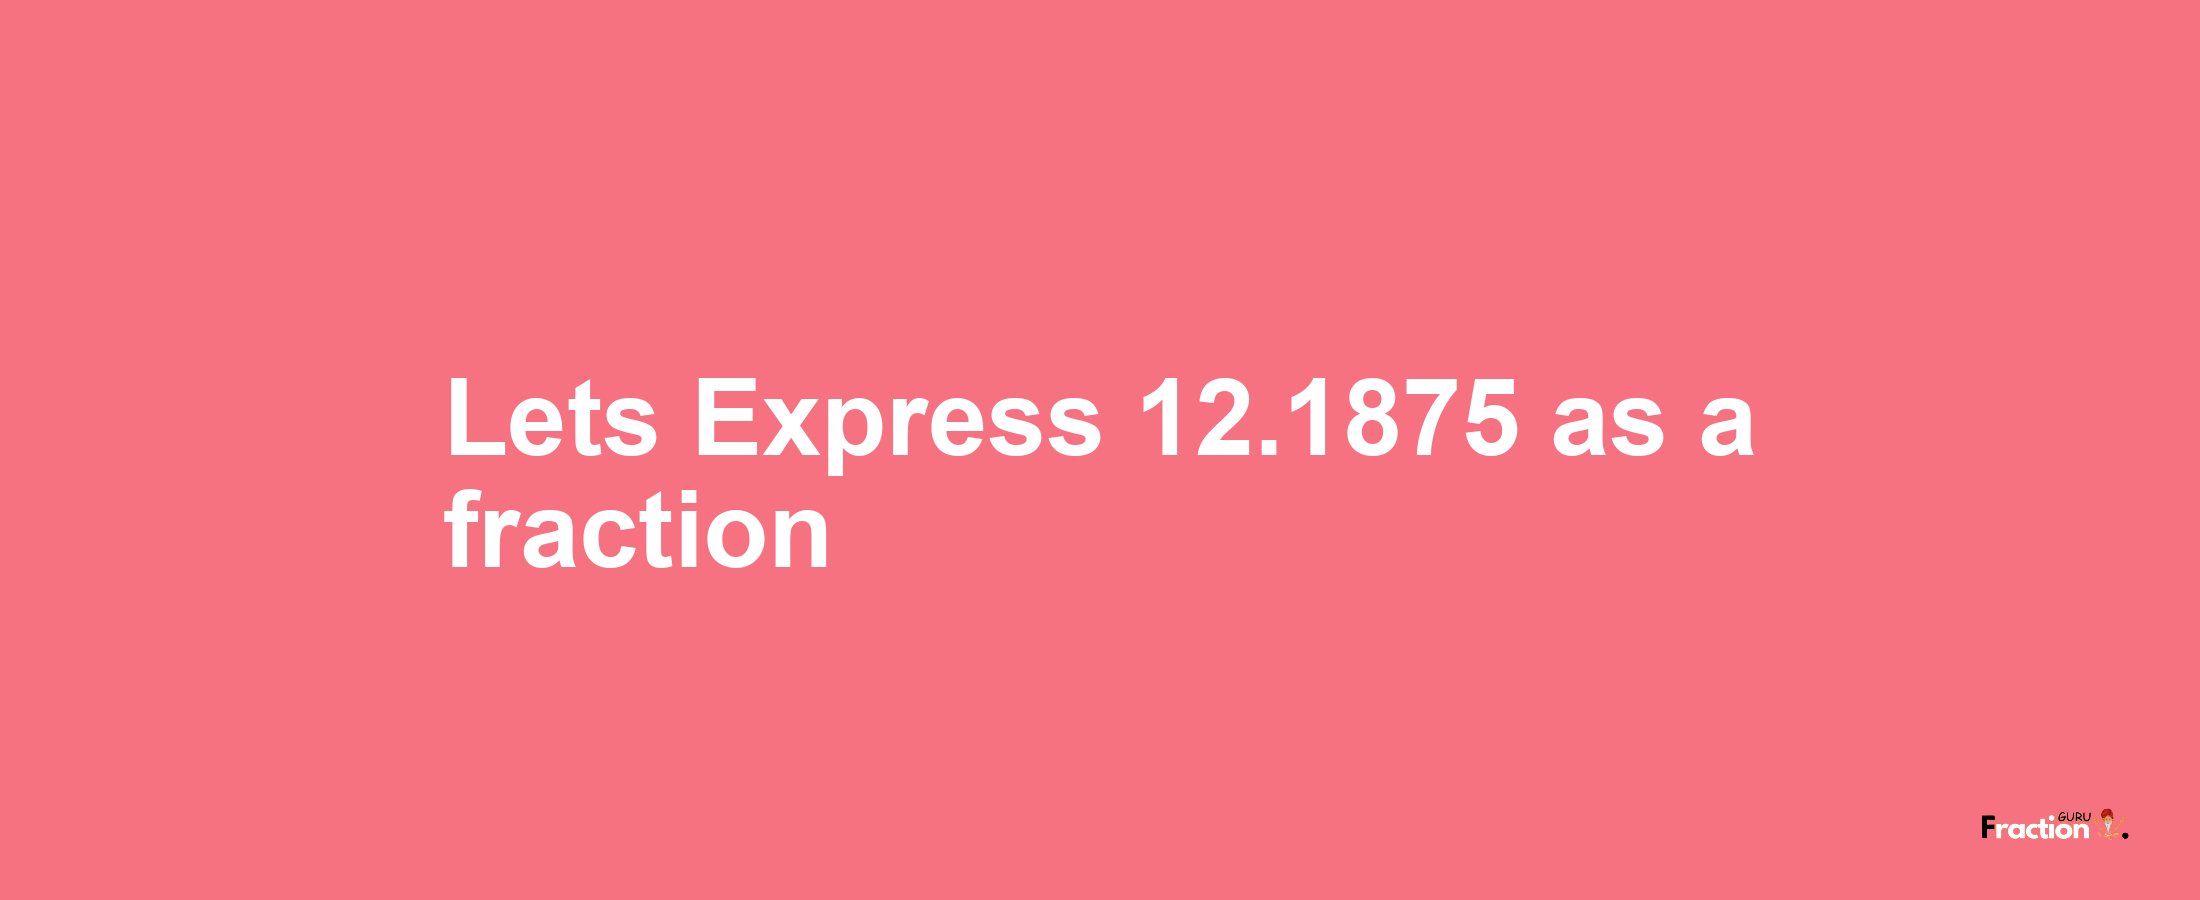 Lets Express 12.1875 as afraction